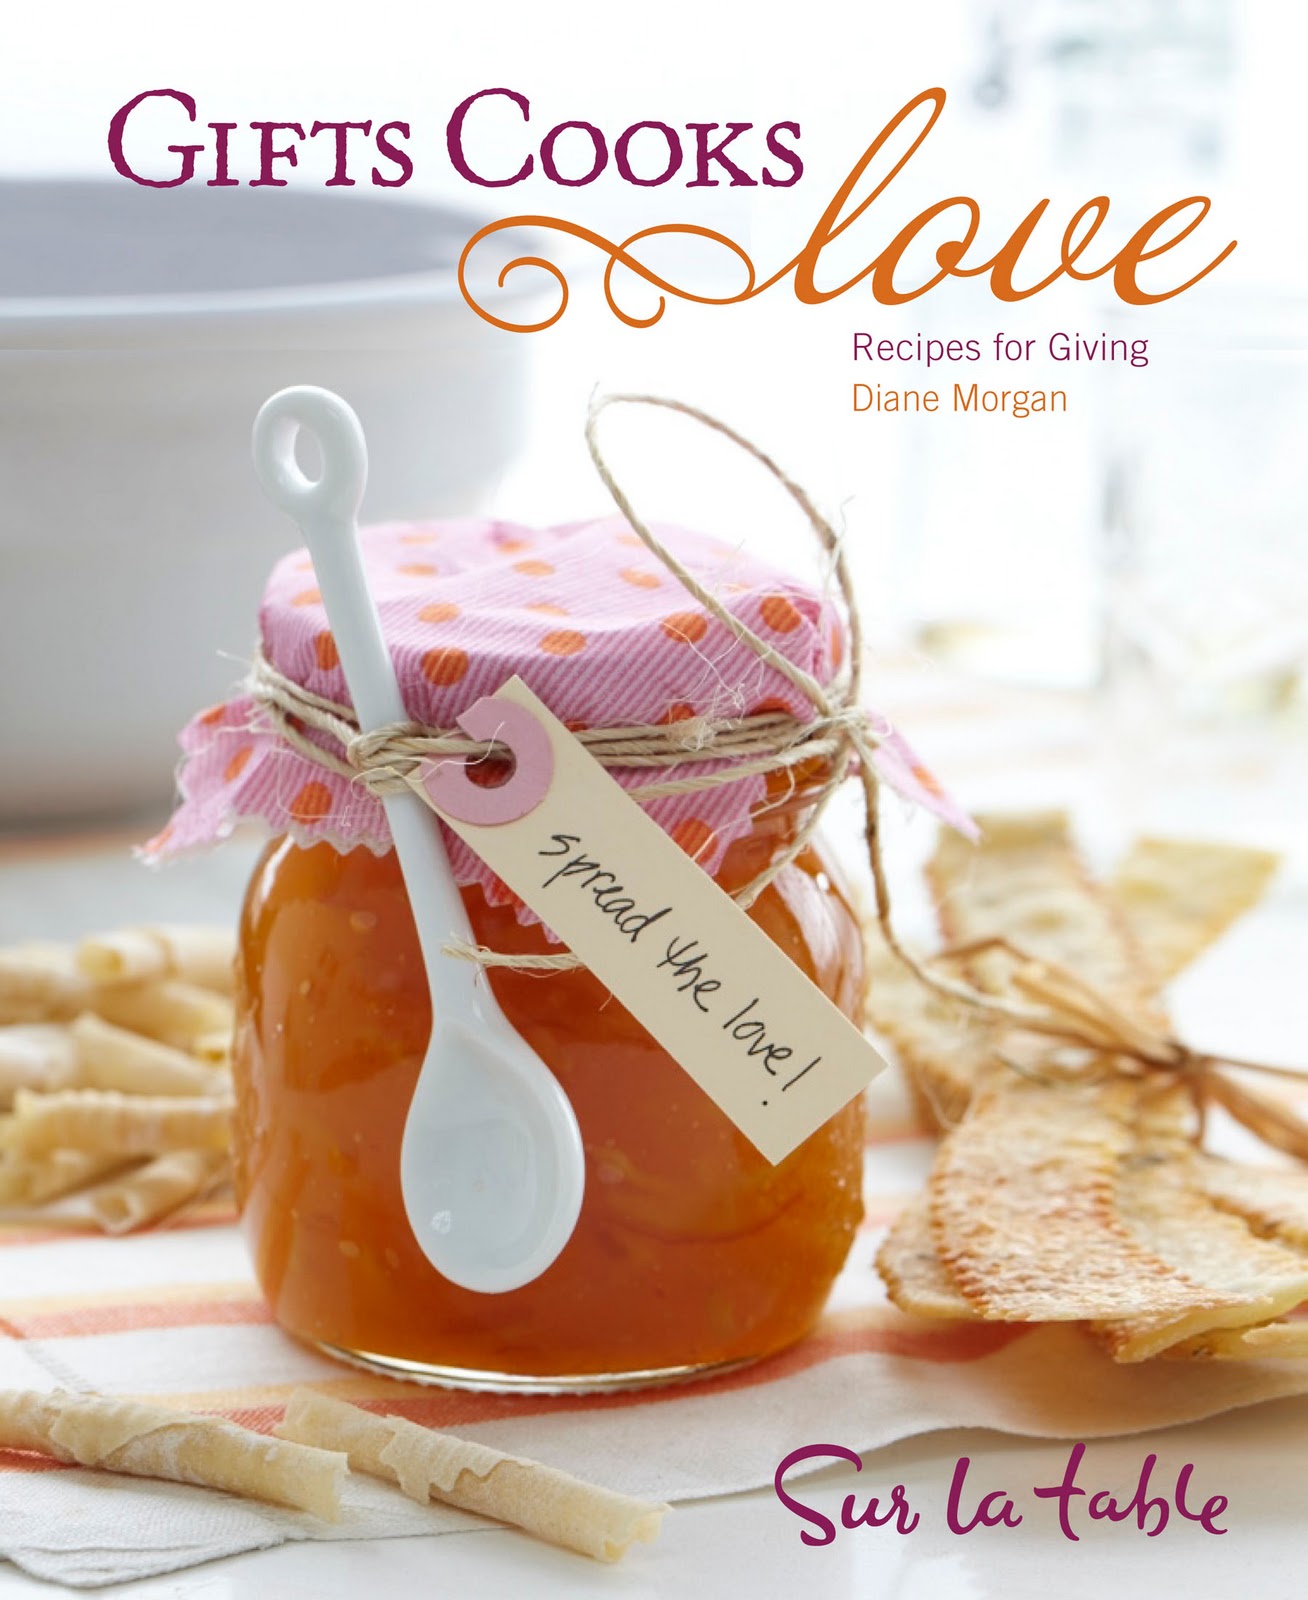 StoveTop Readings: DIANE MORGAN SHOWS HOW TO TURN FOOD INTO WONDERFUL GIFTS